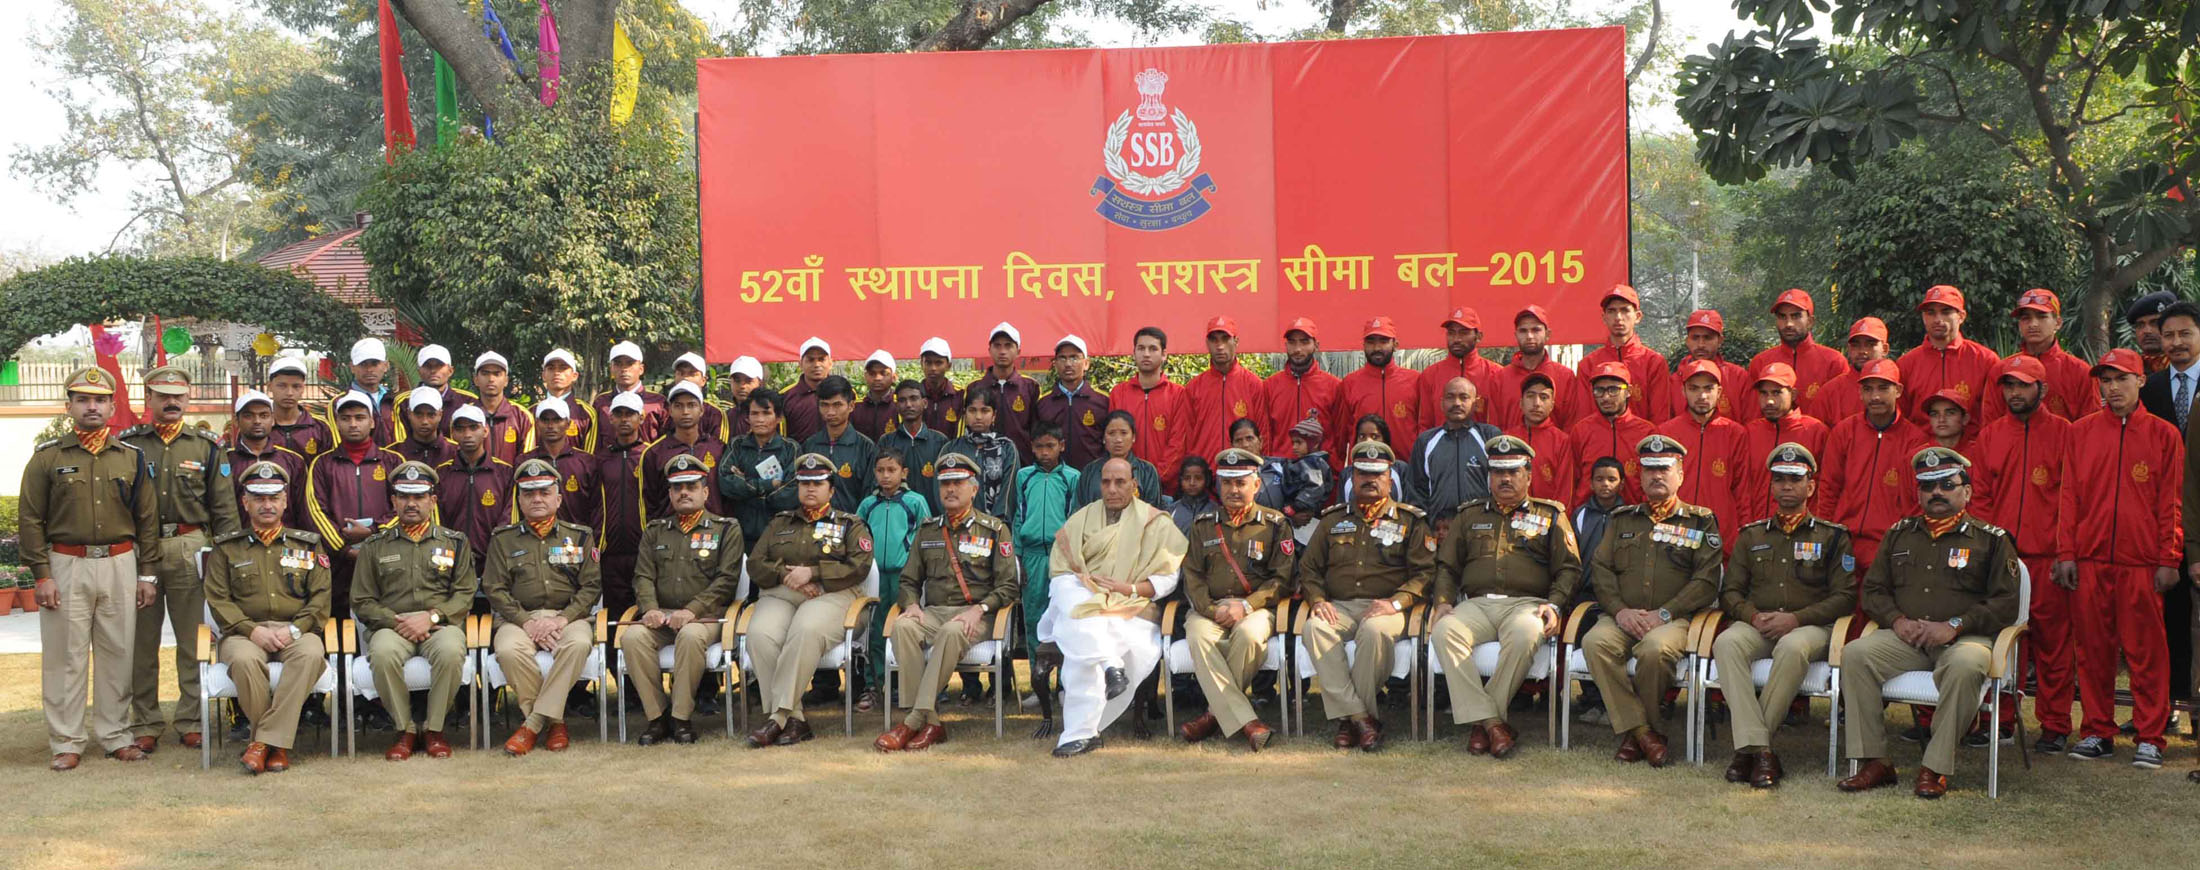 The Union Home Minister, Shri Rajnath Singh in a group photograph at the 52nd anniversary parade of the Sashastra Seema Bal, in New Delhi on December 24, 2015.